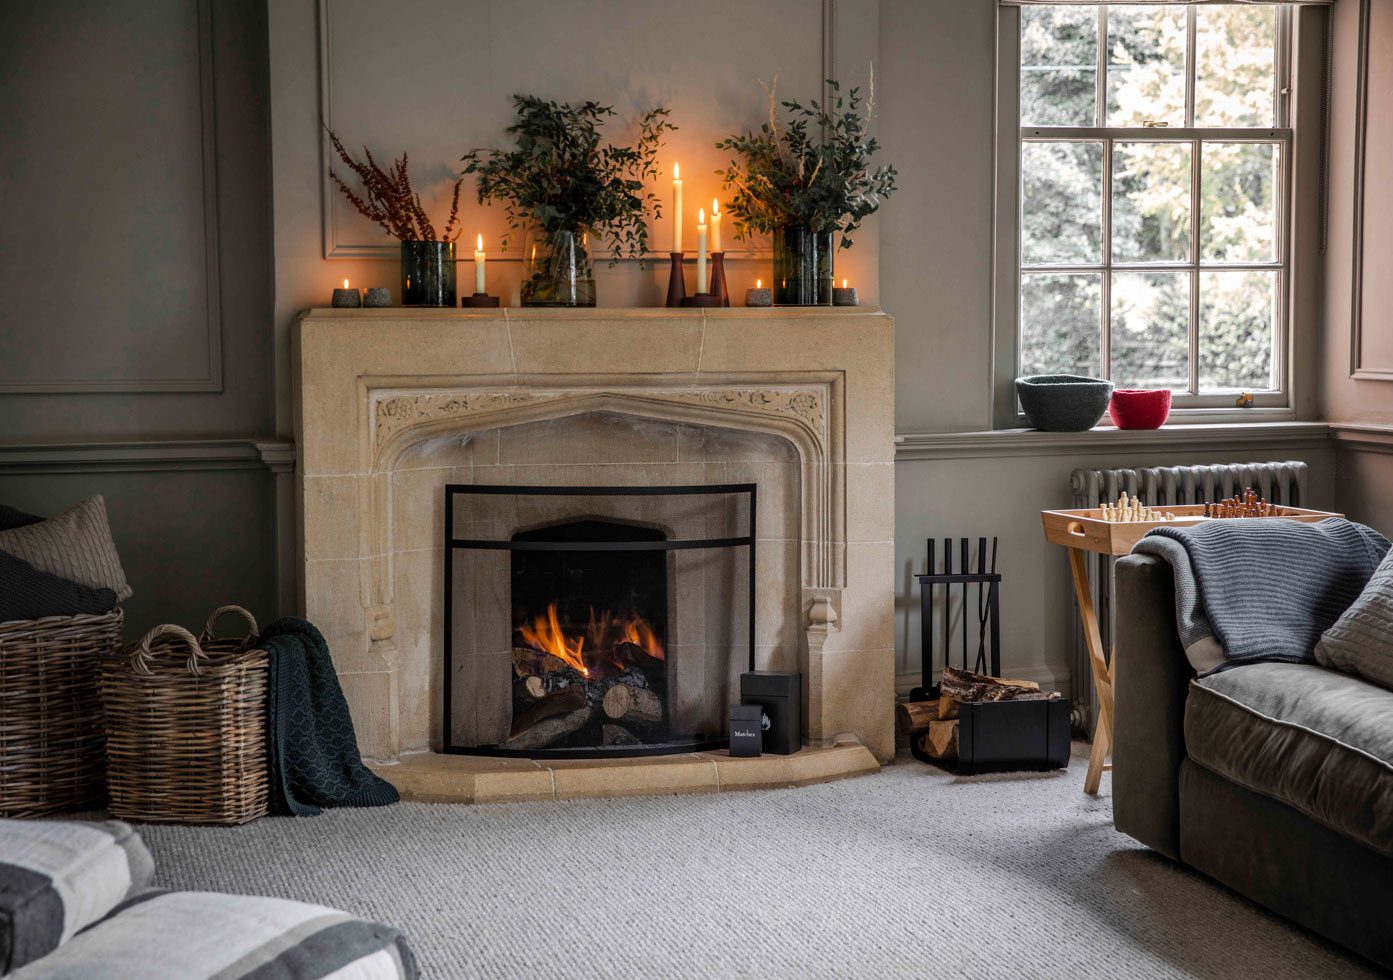 Opening Up A Fireplace Costs Regs And, Cost Of Adding A Fireplace